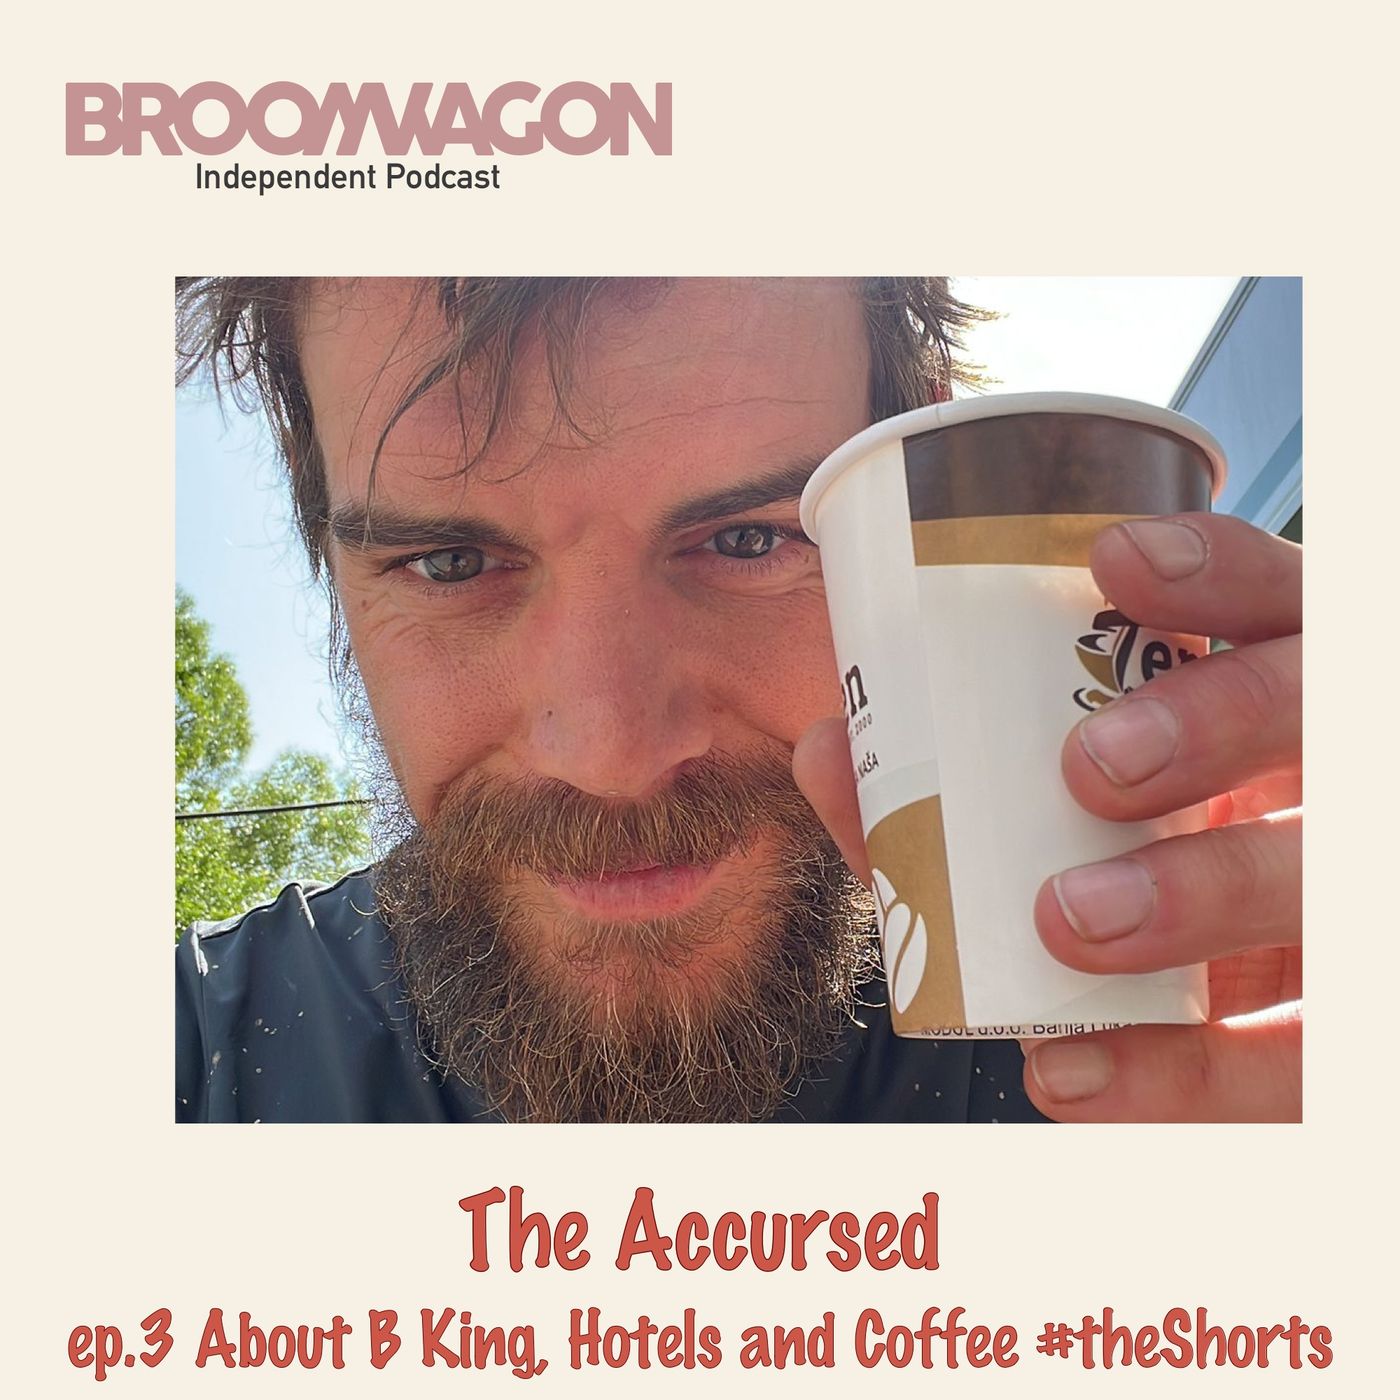 The Accursed ep.3 About B King, Hotels and Coffee #theShorts